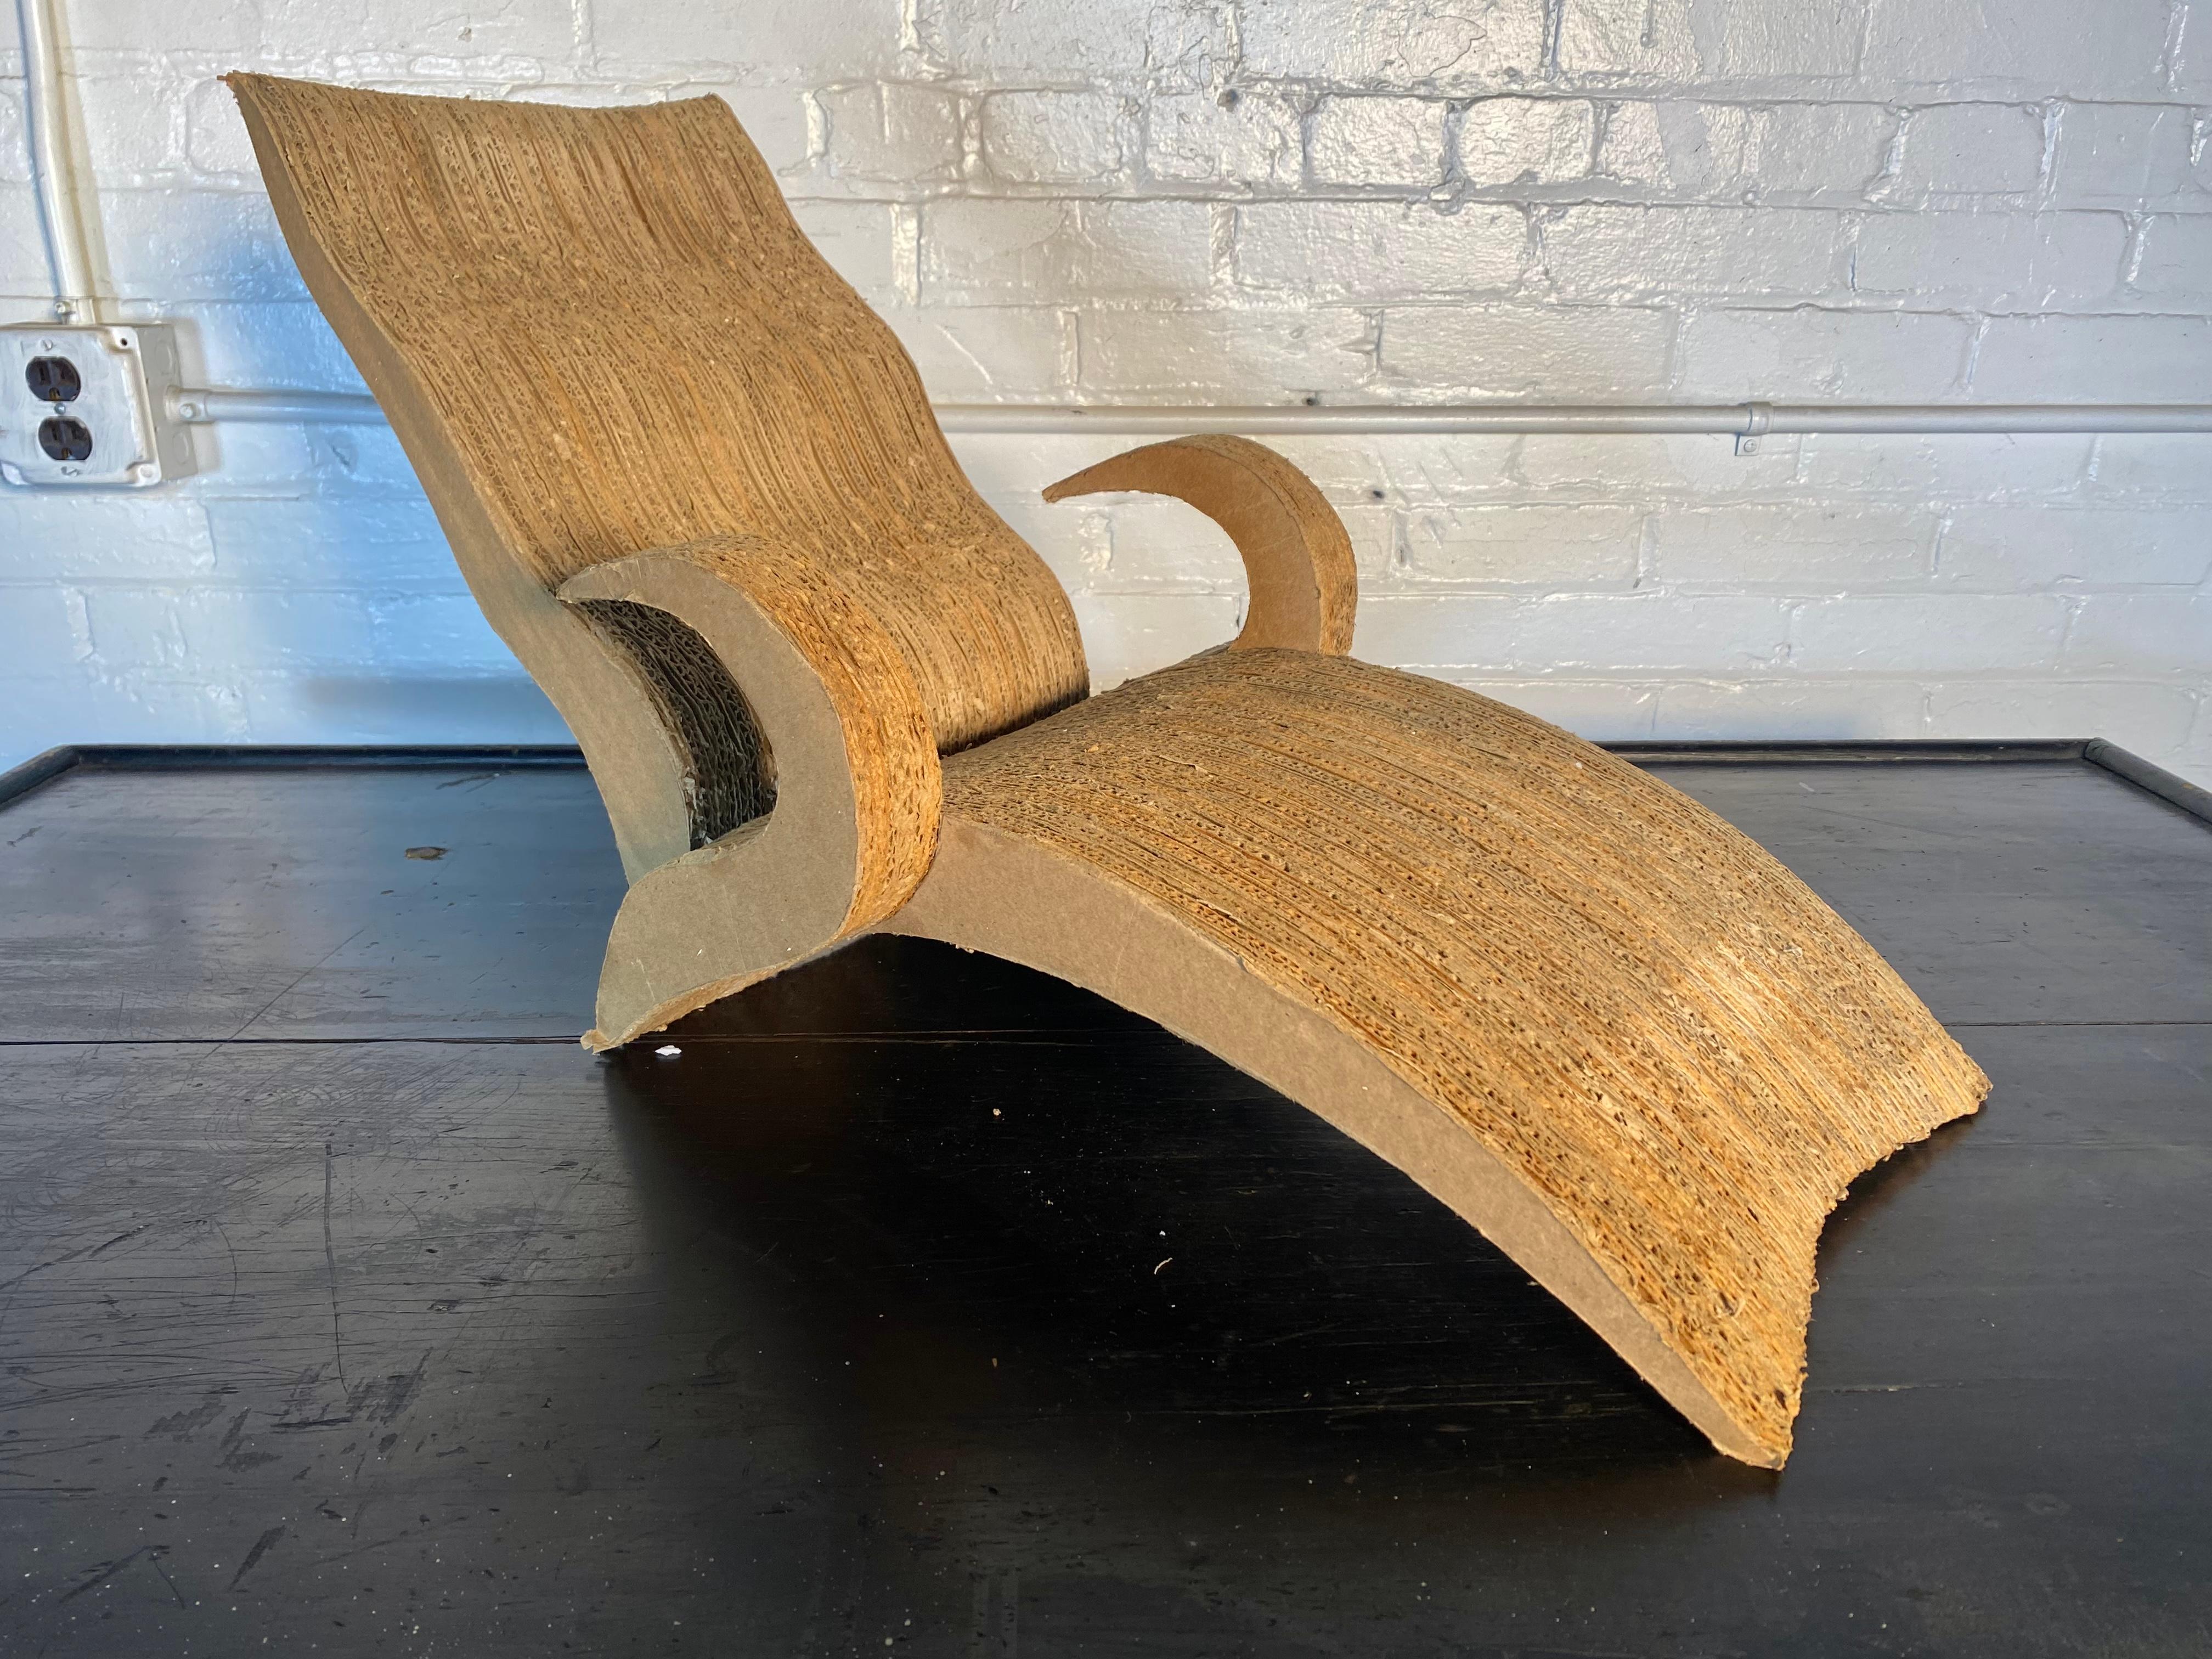 Rare Prototype / Maquette Cardboard Chaise Lounge by Joel Stearns  For Sale 1